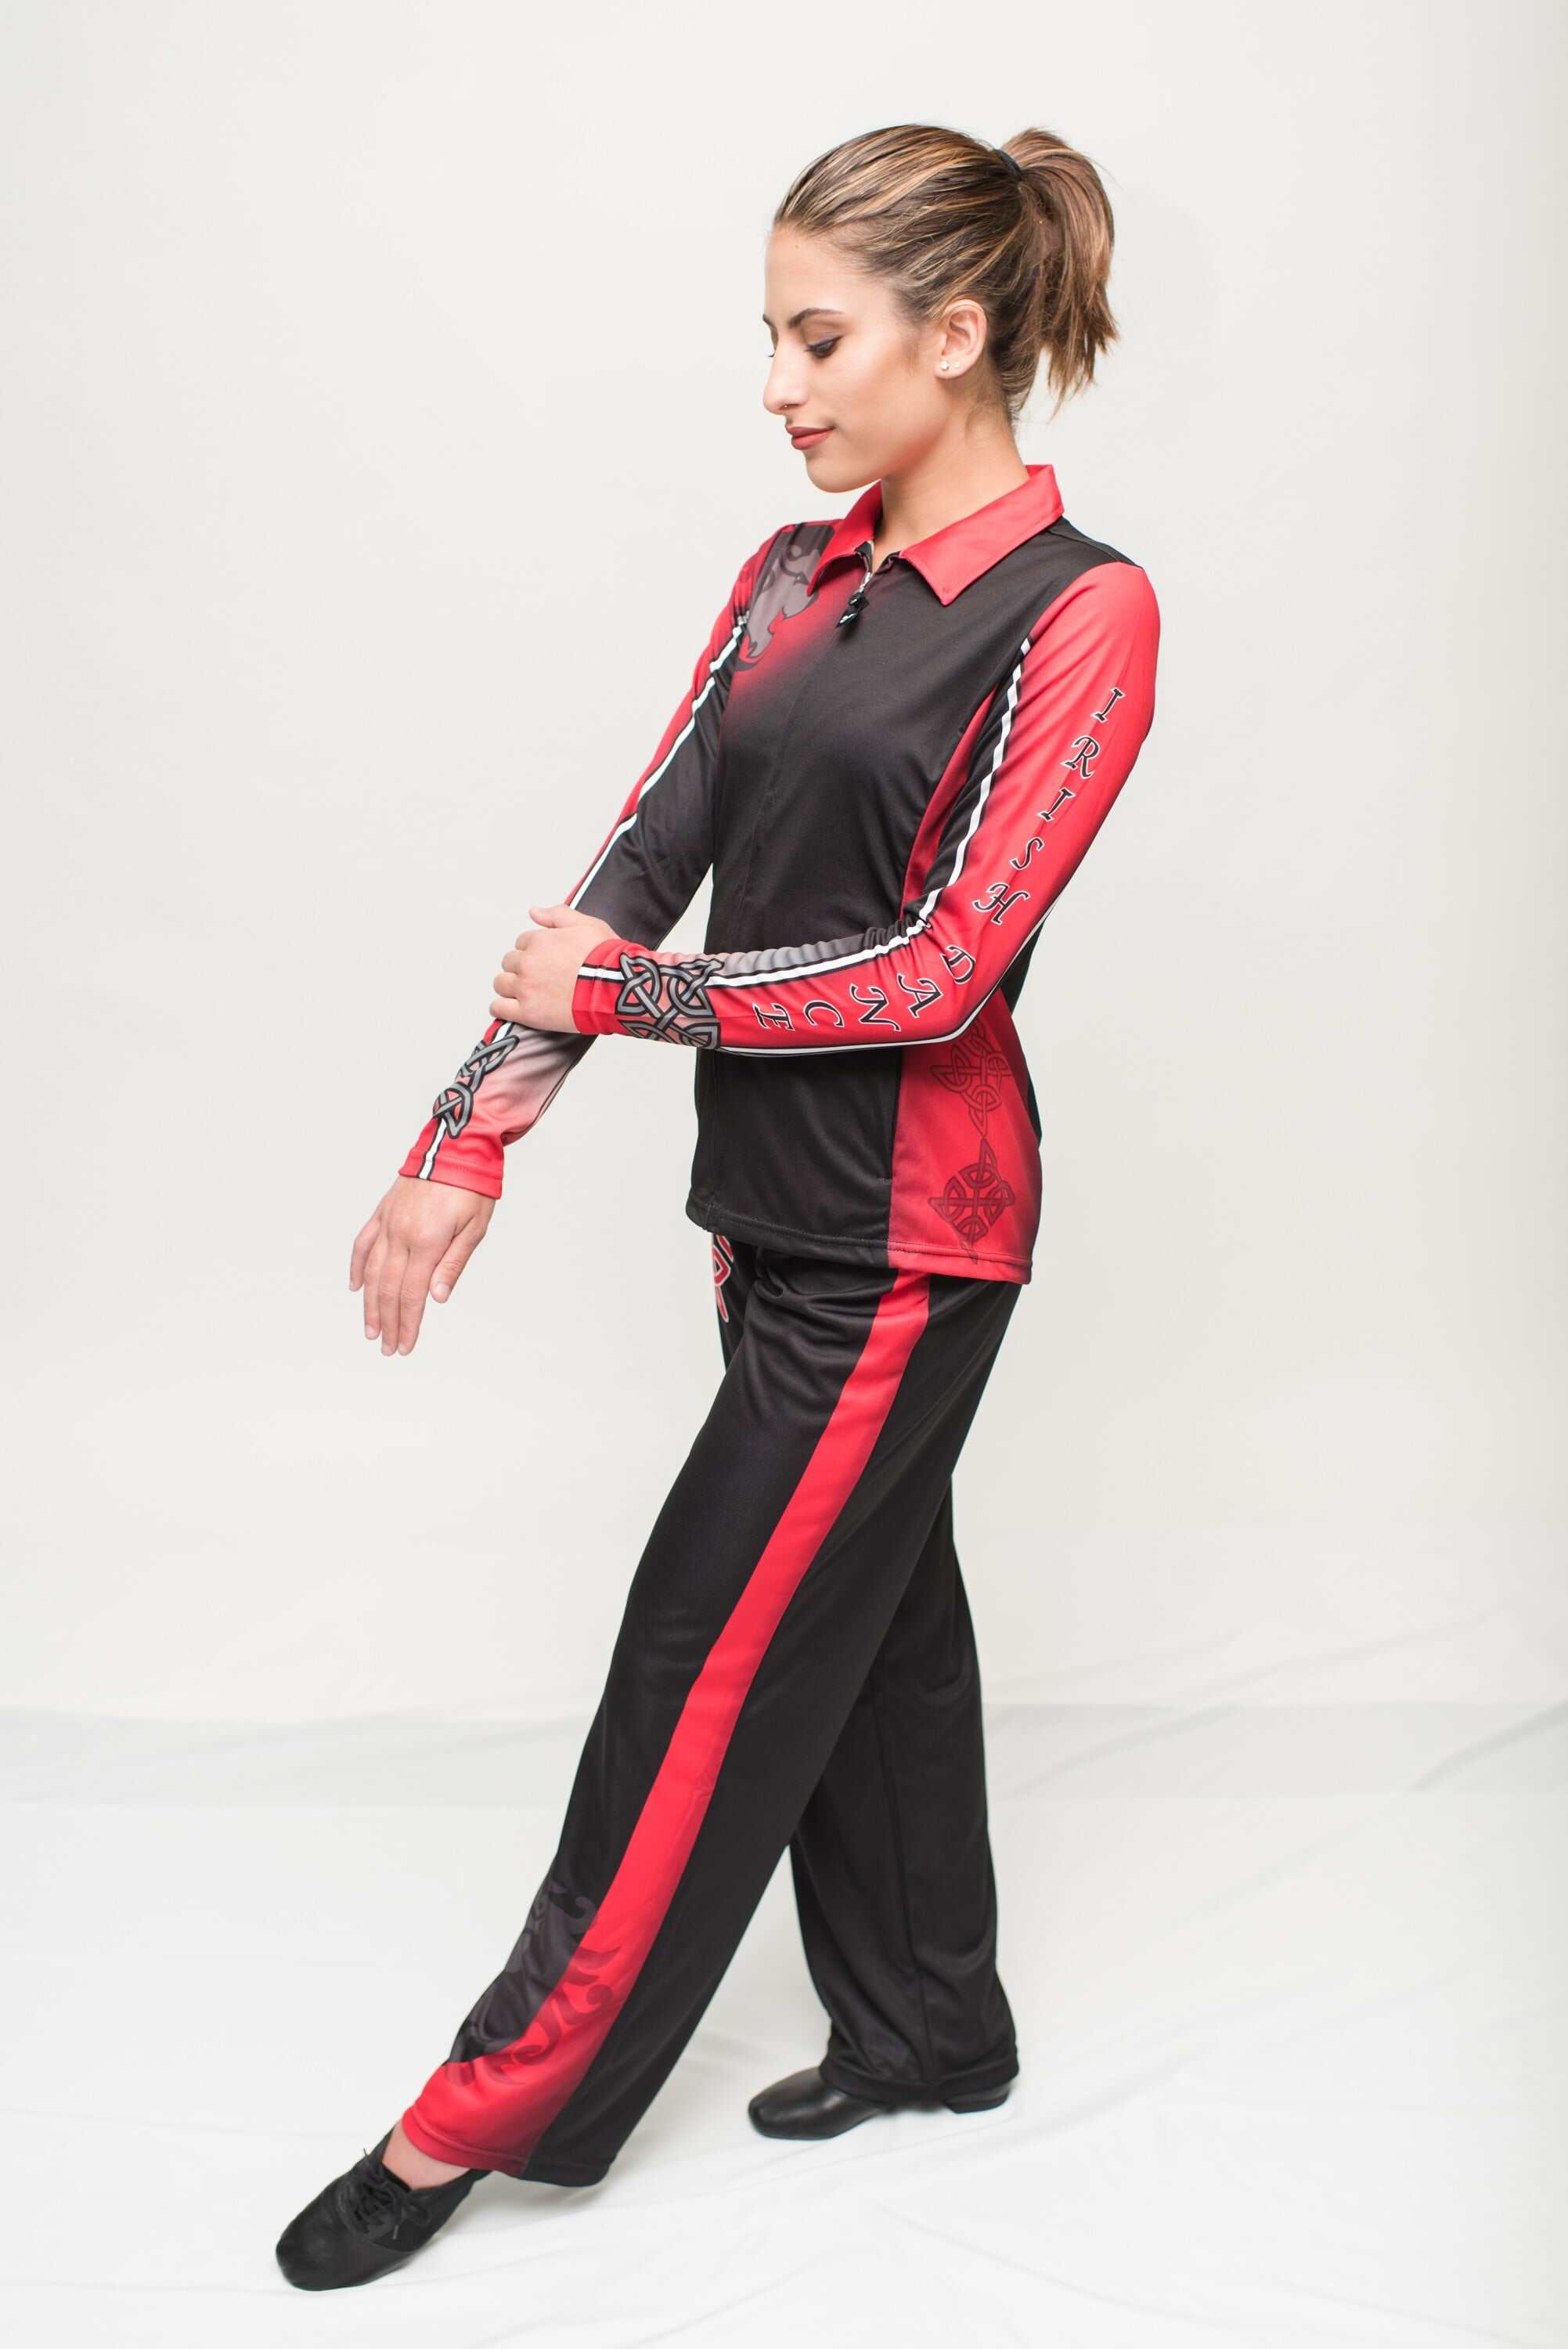 Our SubDi II Sublimation enables this clean symetrical red and black  warm-up to build your dance studio image.